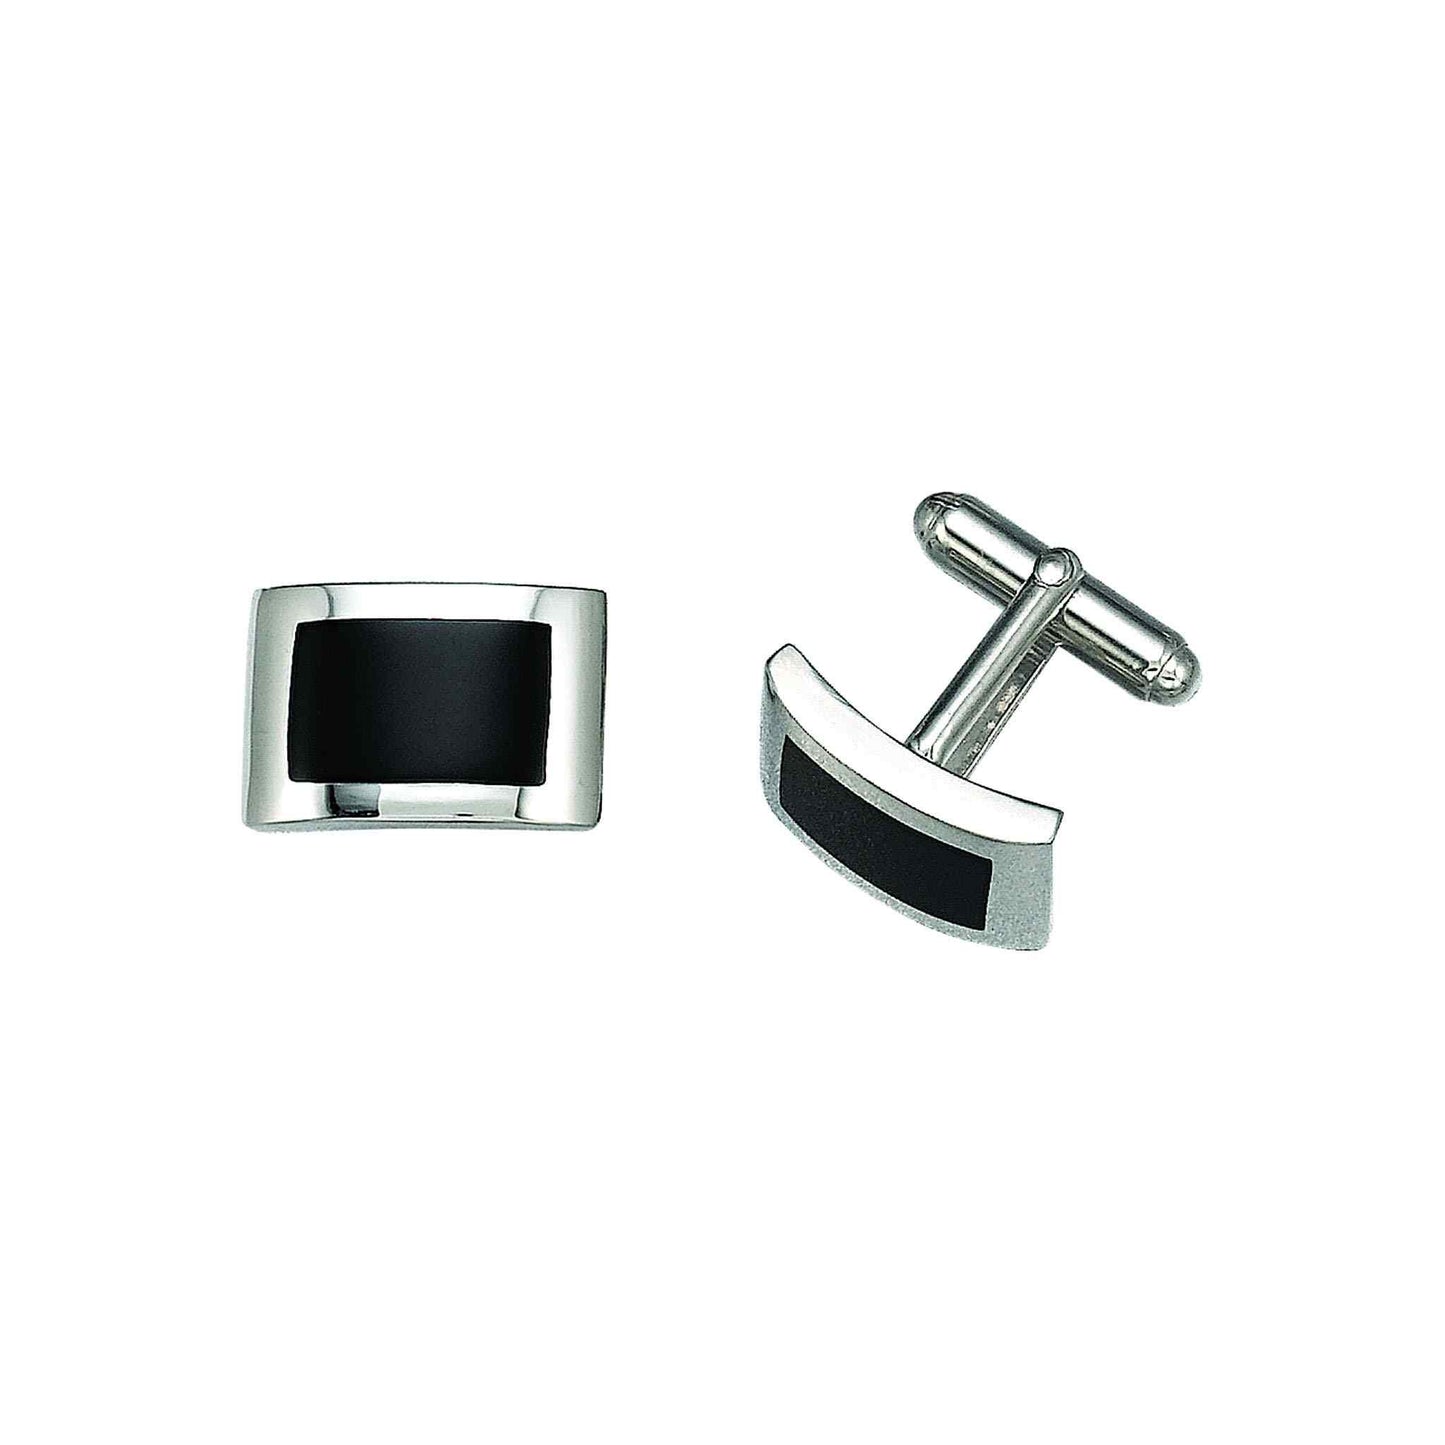 A sterling silver rectangle cufflinks dapped with onyx inlay displayed on a neutral white background.